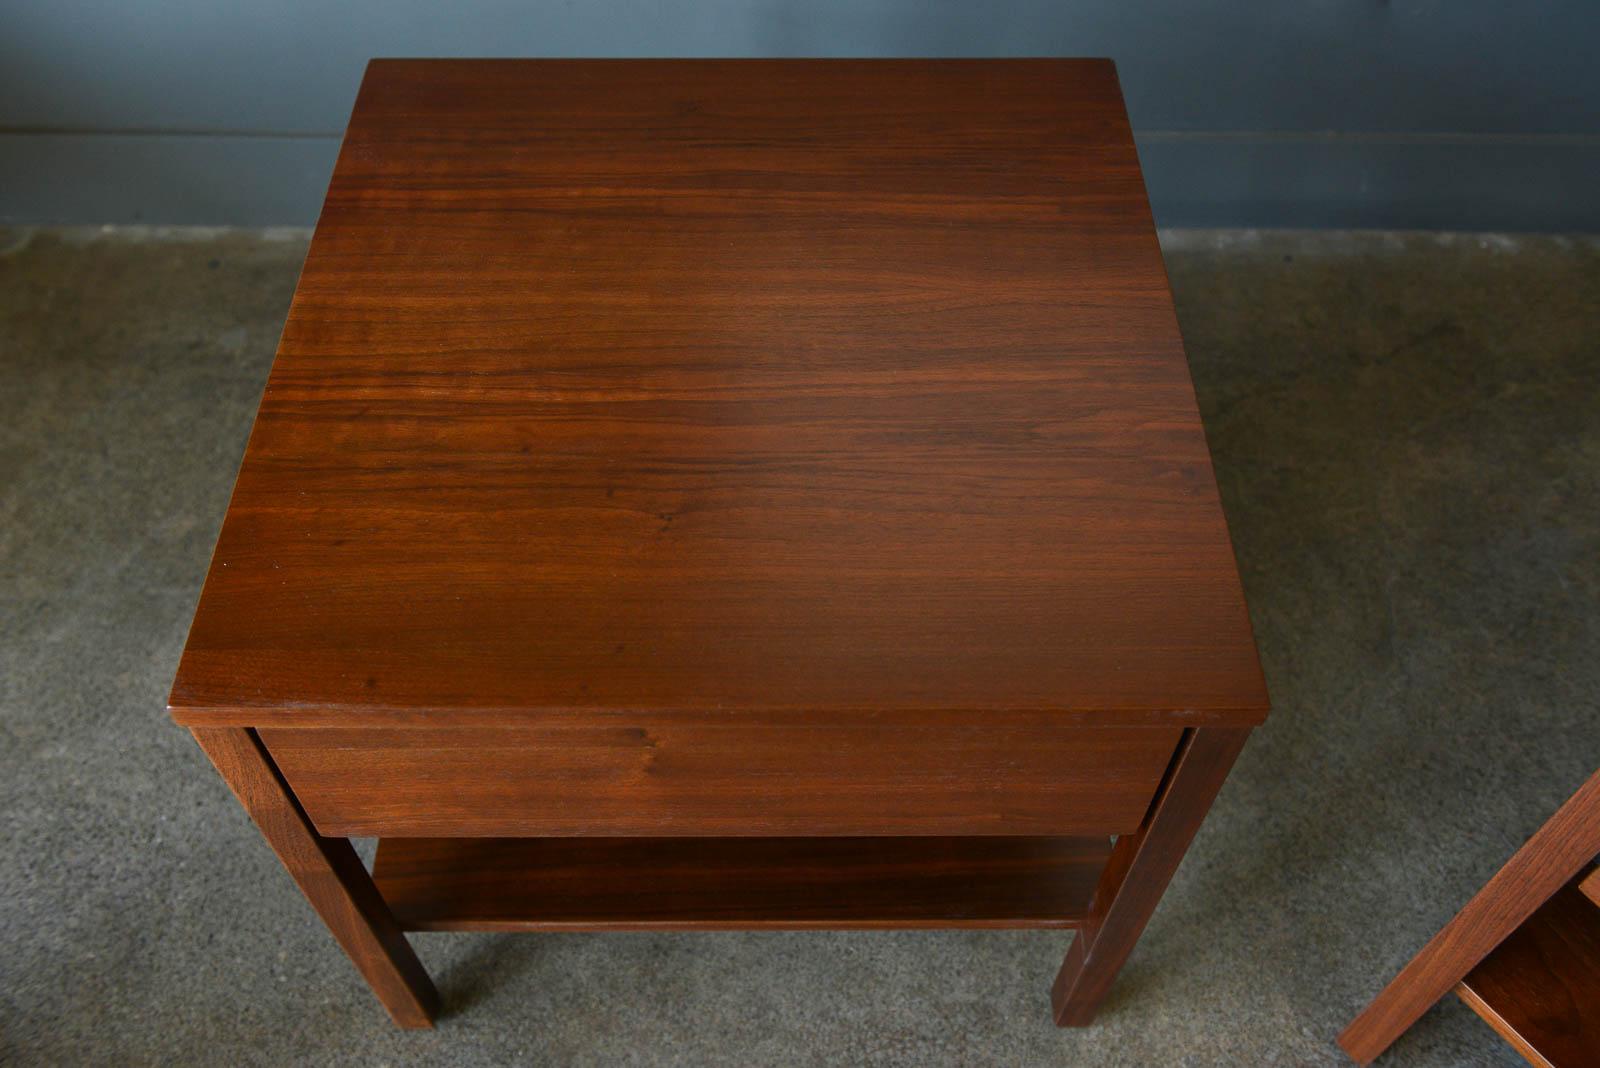 Mid-20th Century Pair of Walnut Nightstands or Side Tables by Florence Knoll, ca. 1951